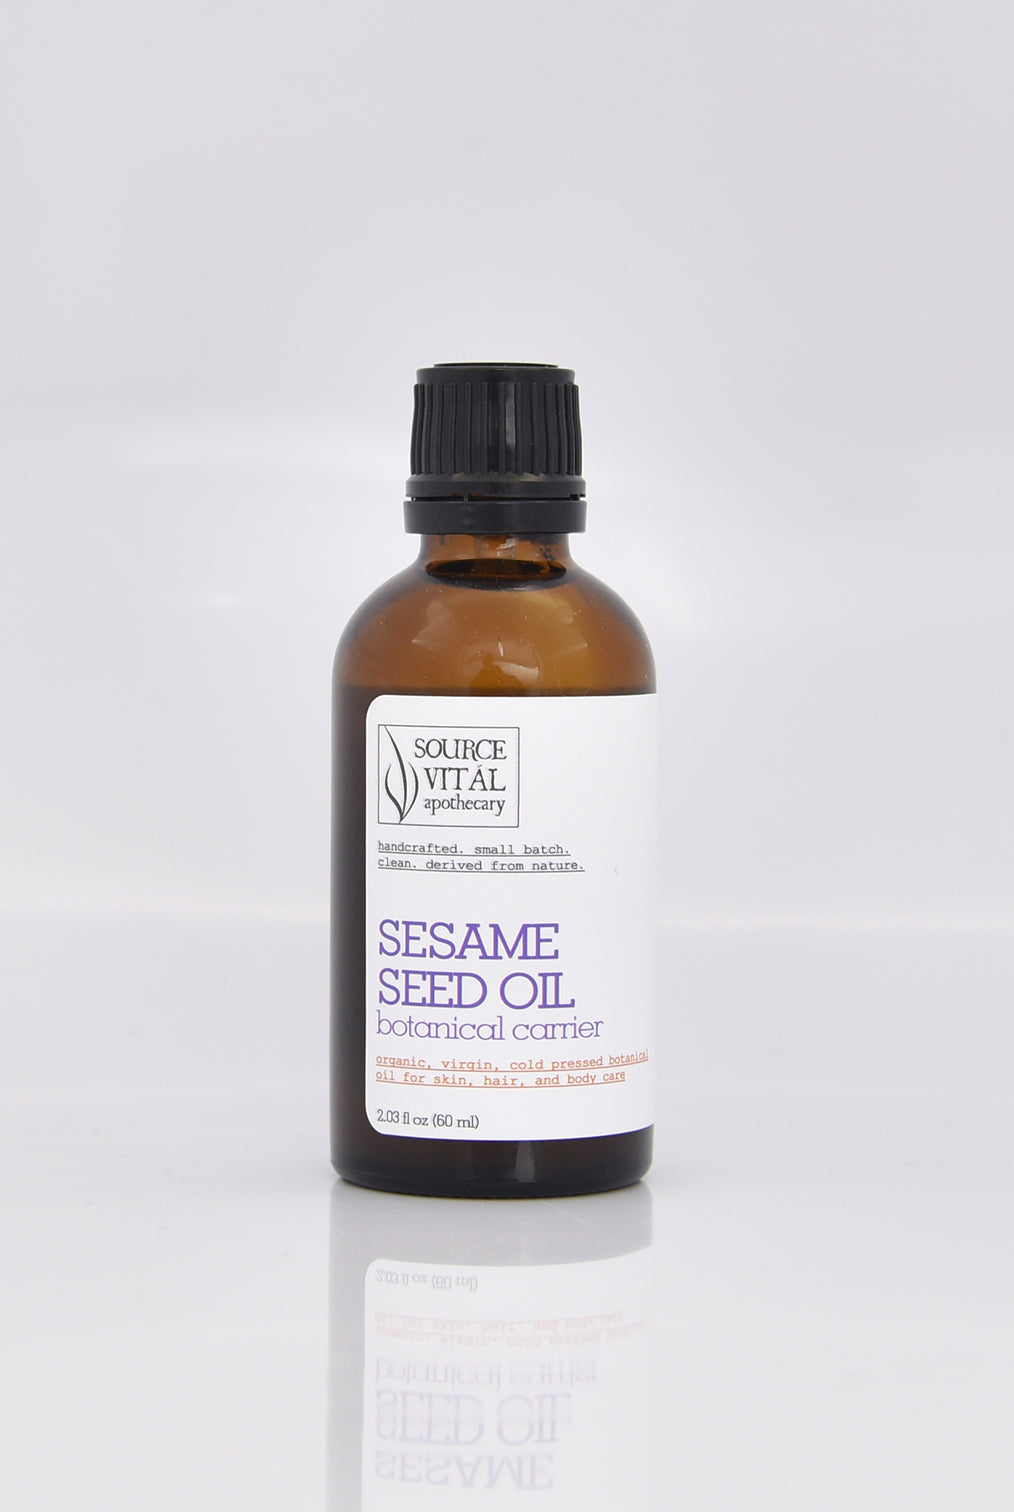 Buy Cold Pressed Organic Sesame Oil for Cooking